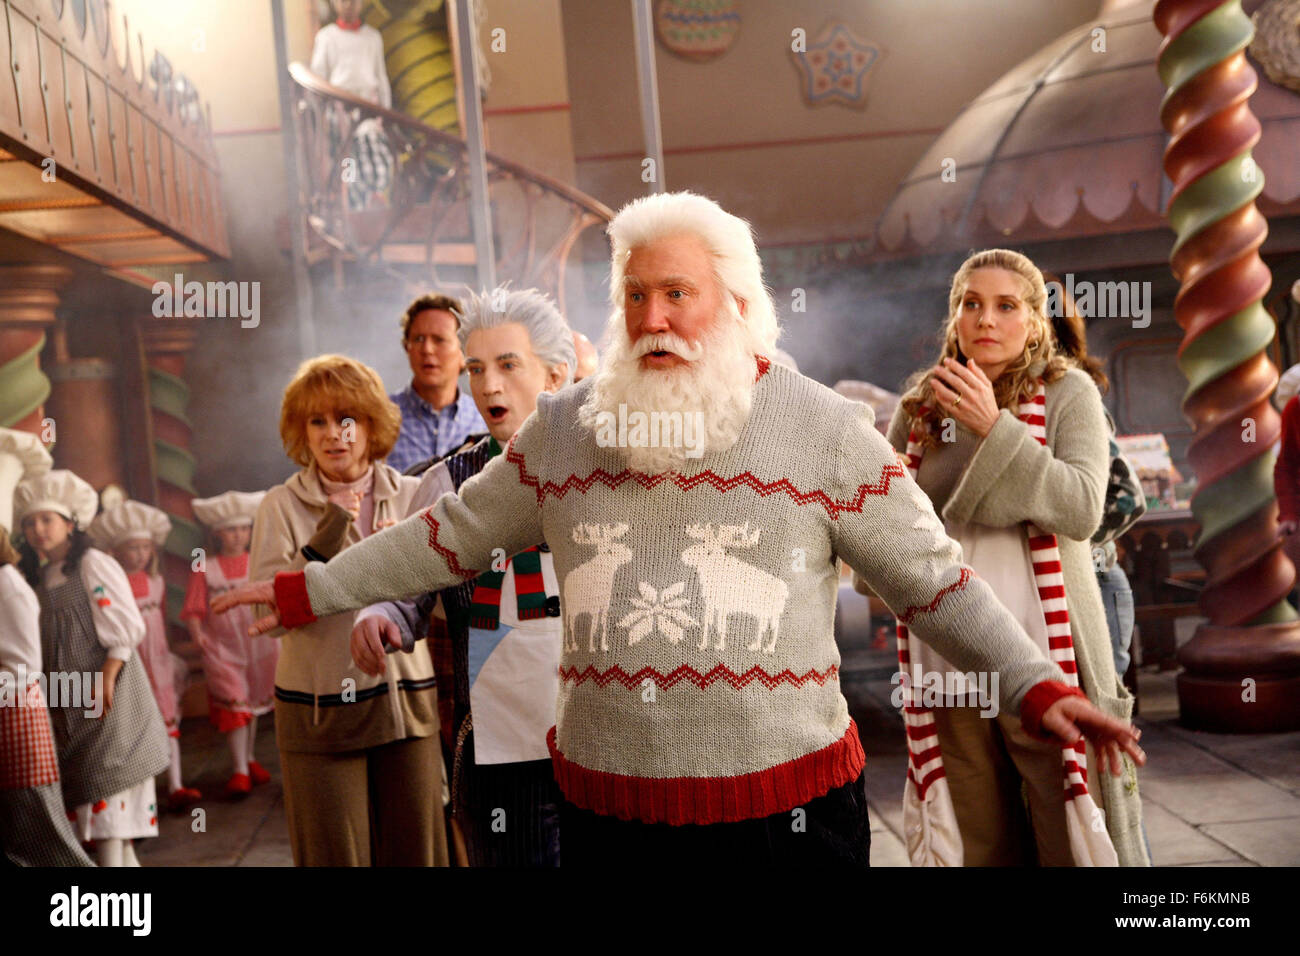 RELEASE DATE: November 3, 2006. MOVIE TITLE: Santa Clause 3: The Escape Clause. STUDIO: Walt Disney Pictures. PLOT: Santa (Allen), aka Scott Calvin, is faced with double-duty: how to keep his new family happy, and how to stop Jack Frost from taking over Christmas. PICTURED: ANN-MARGRET as Sylvia Newman, JUDGE REINHOLD as Neil Miller, MARTIN SHORT as Jack Frost, TIM ALLEN as Santa / Scott Calvin and ELIZABETH MITCHELL as Mrs. Claus / Carol. Stock Photo